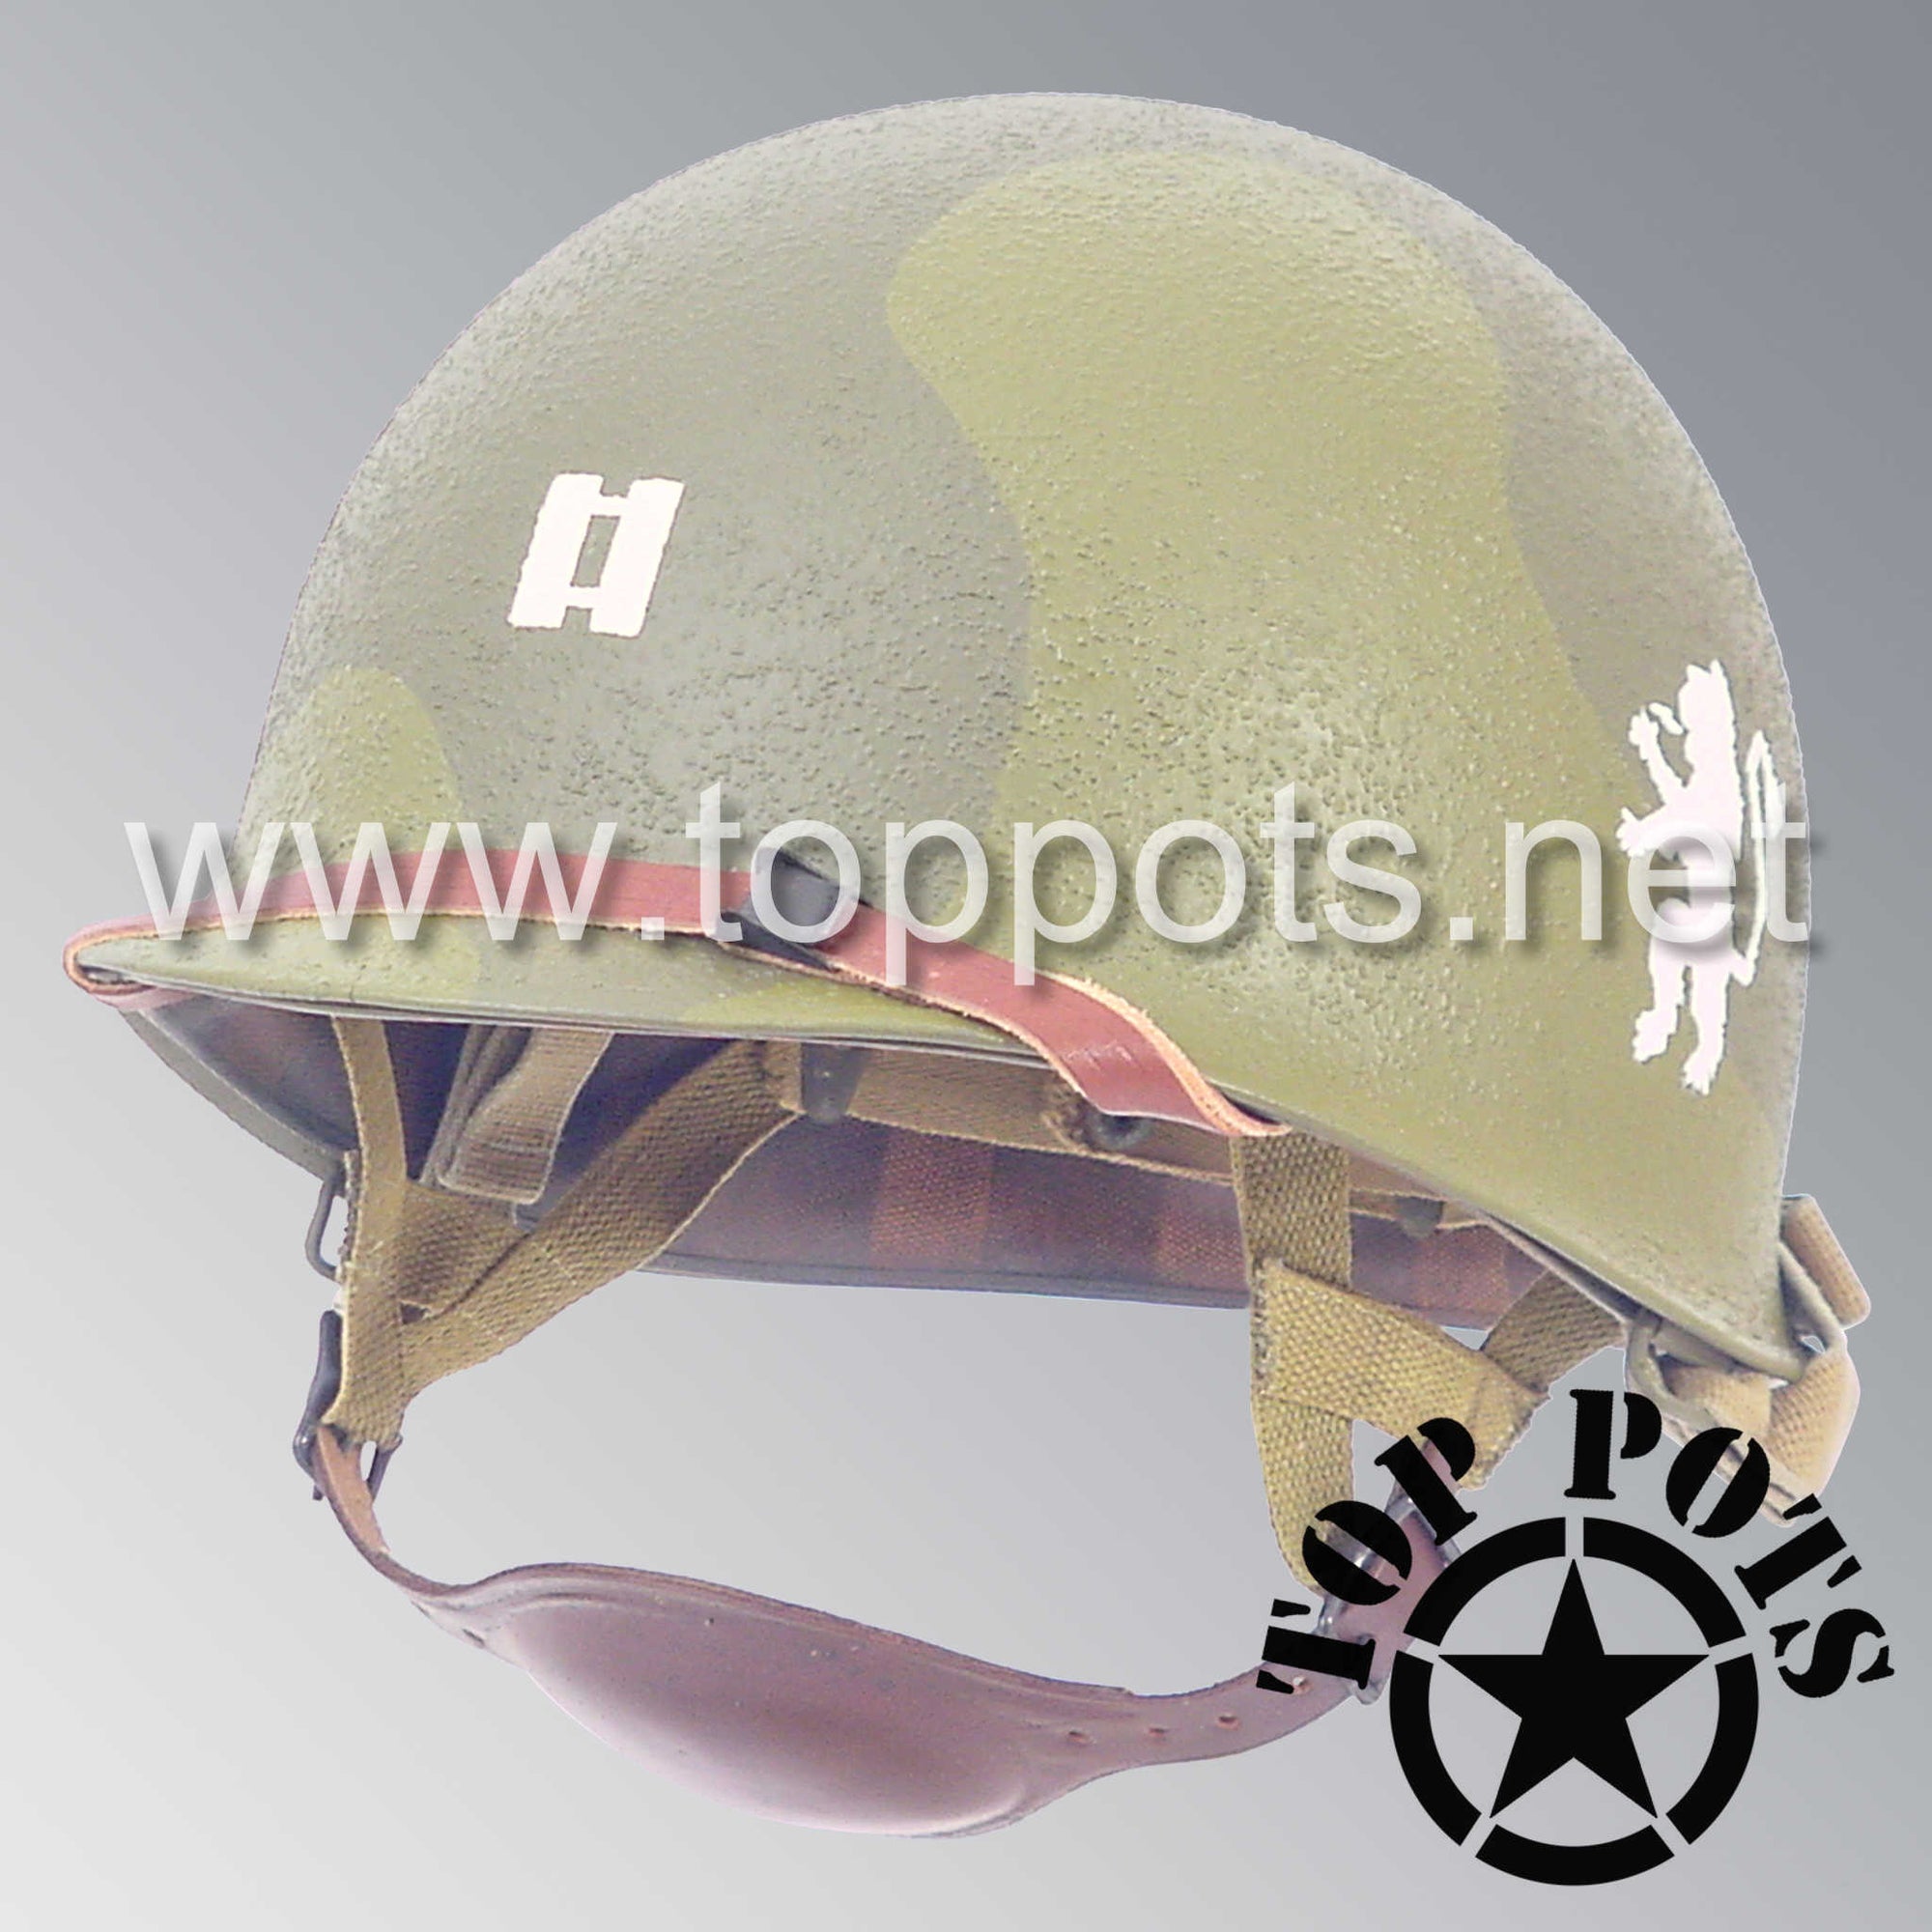 WWII US Army Restored Original M1C Paratrooper Airborne Helmet Swivel Bale Shell and Liner with 505th PIR Officer Pathfinder Camouflage Emblem